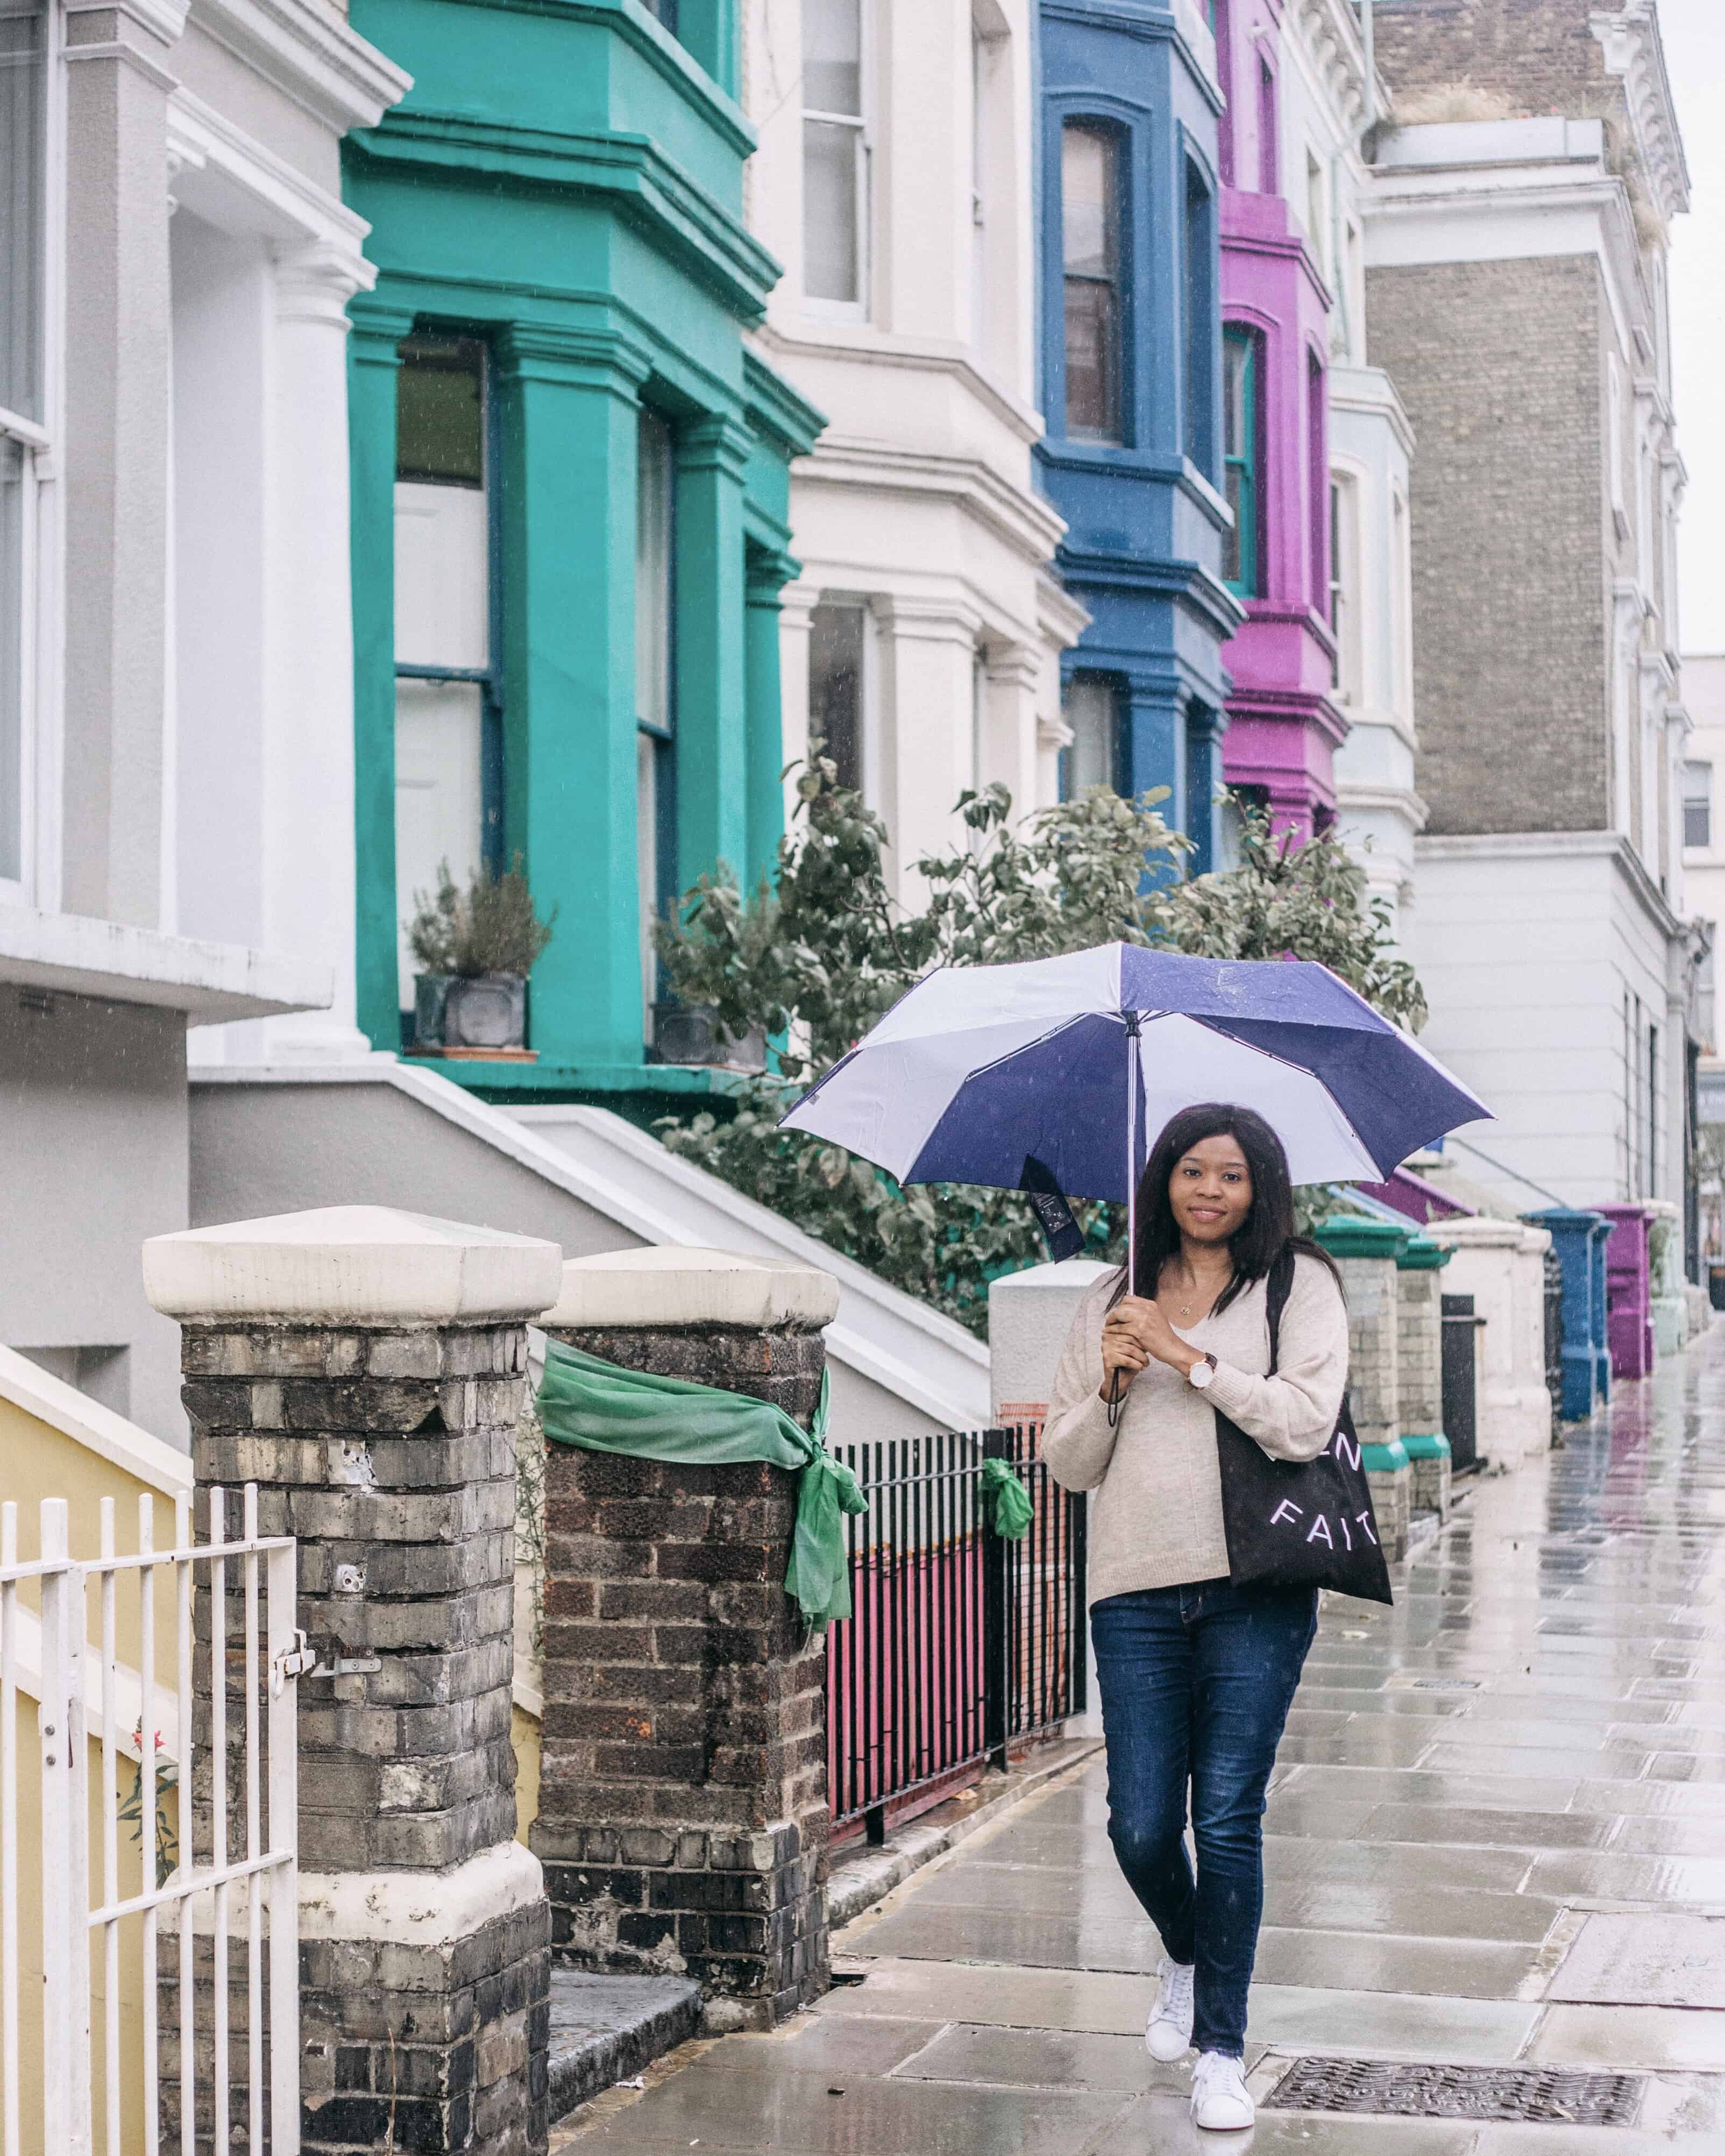 London Day 2: Things to Do In Notting Hill